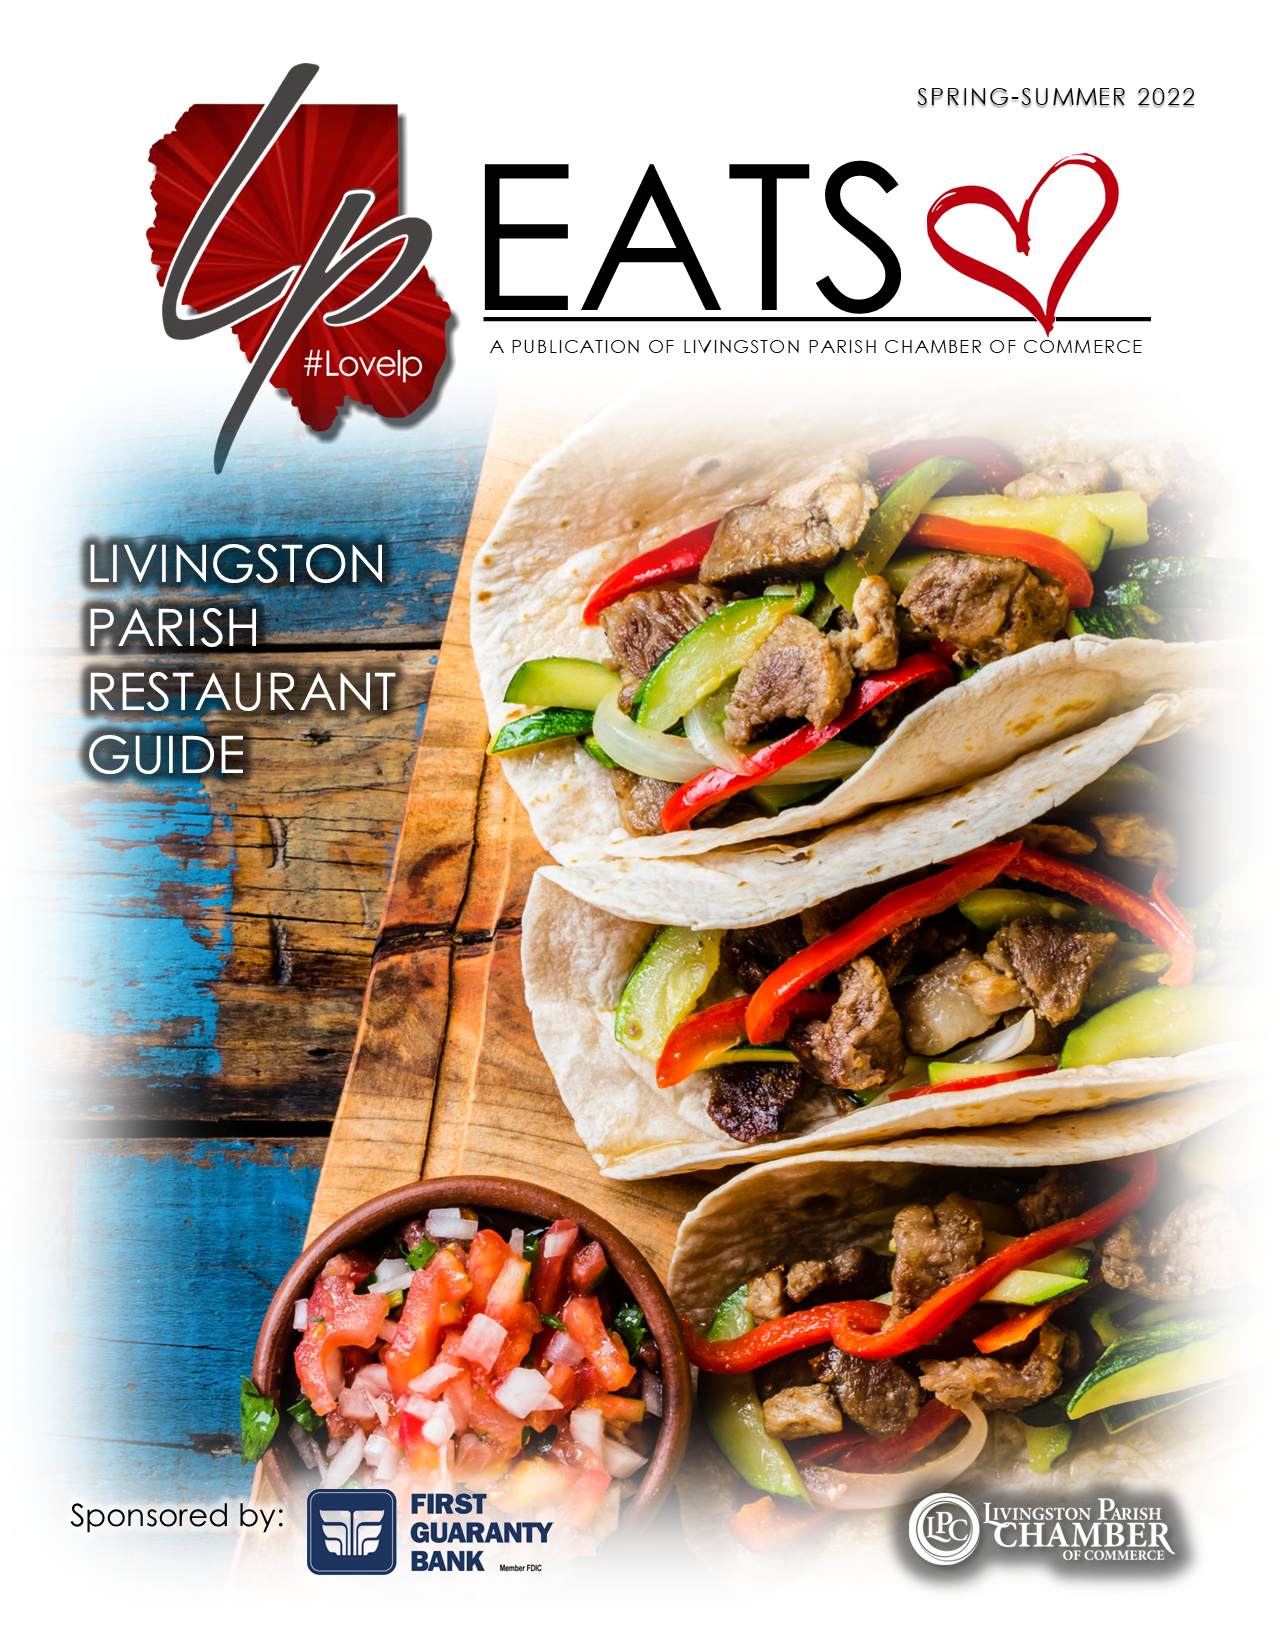 Image for LP Eats Restaurant Guide - Your One-Stop Source for Dining in Livingston Parish